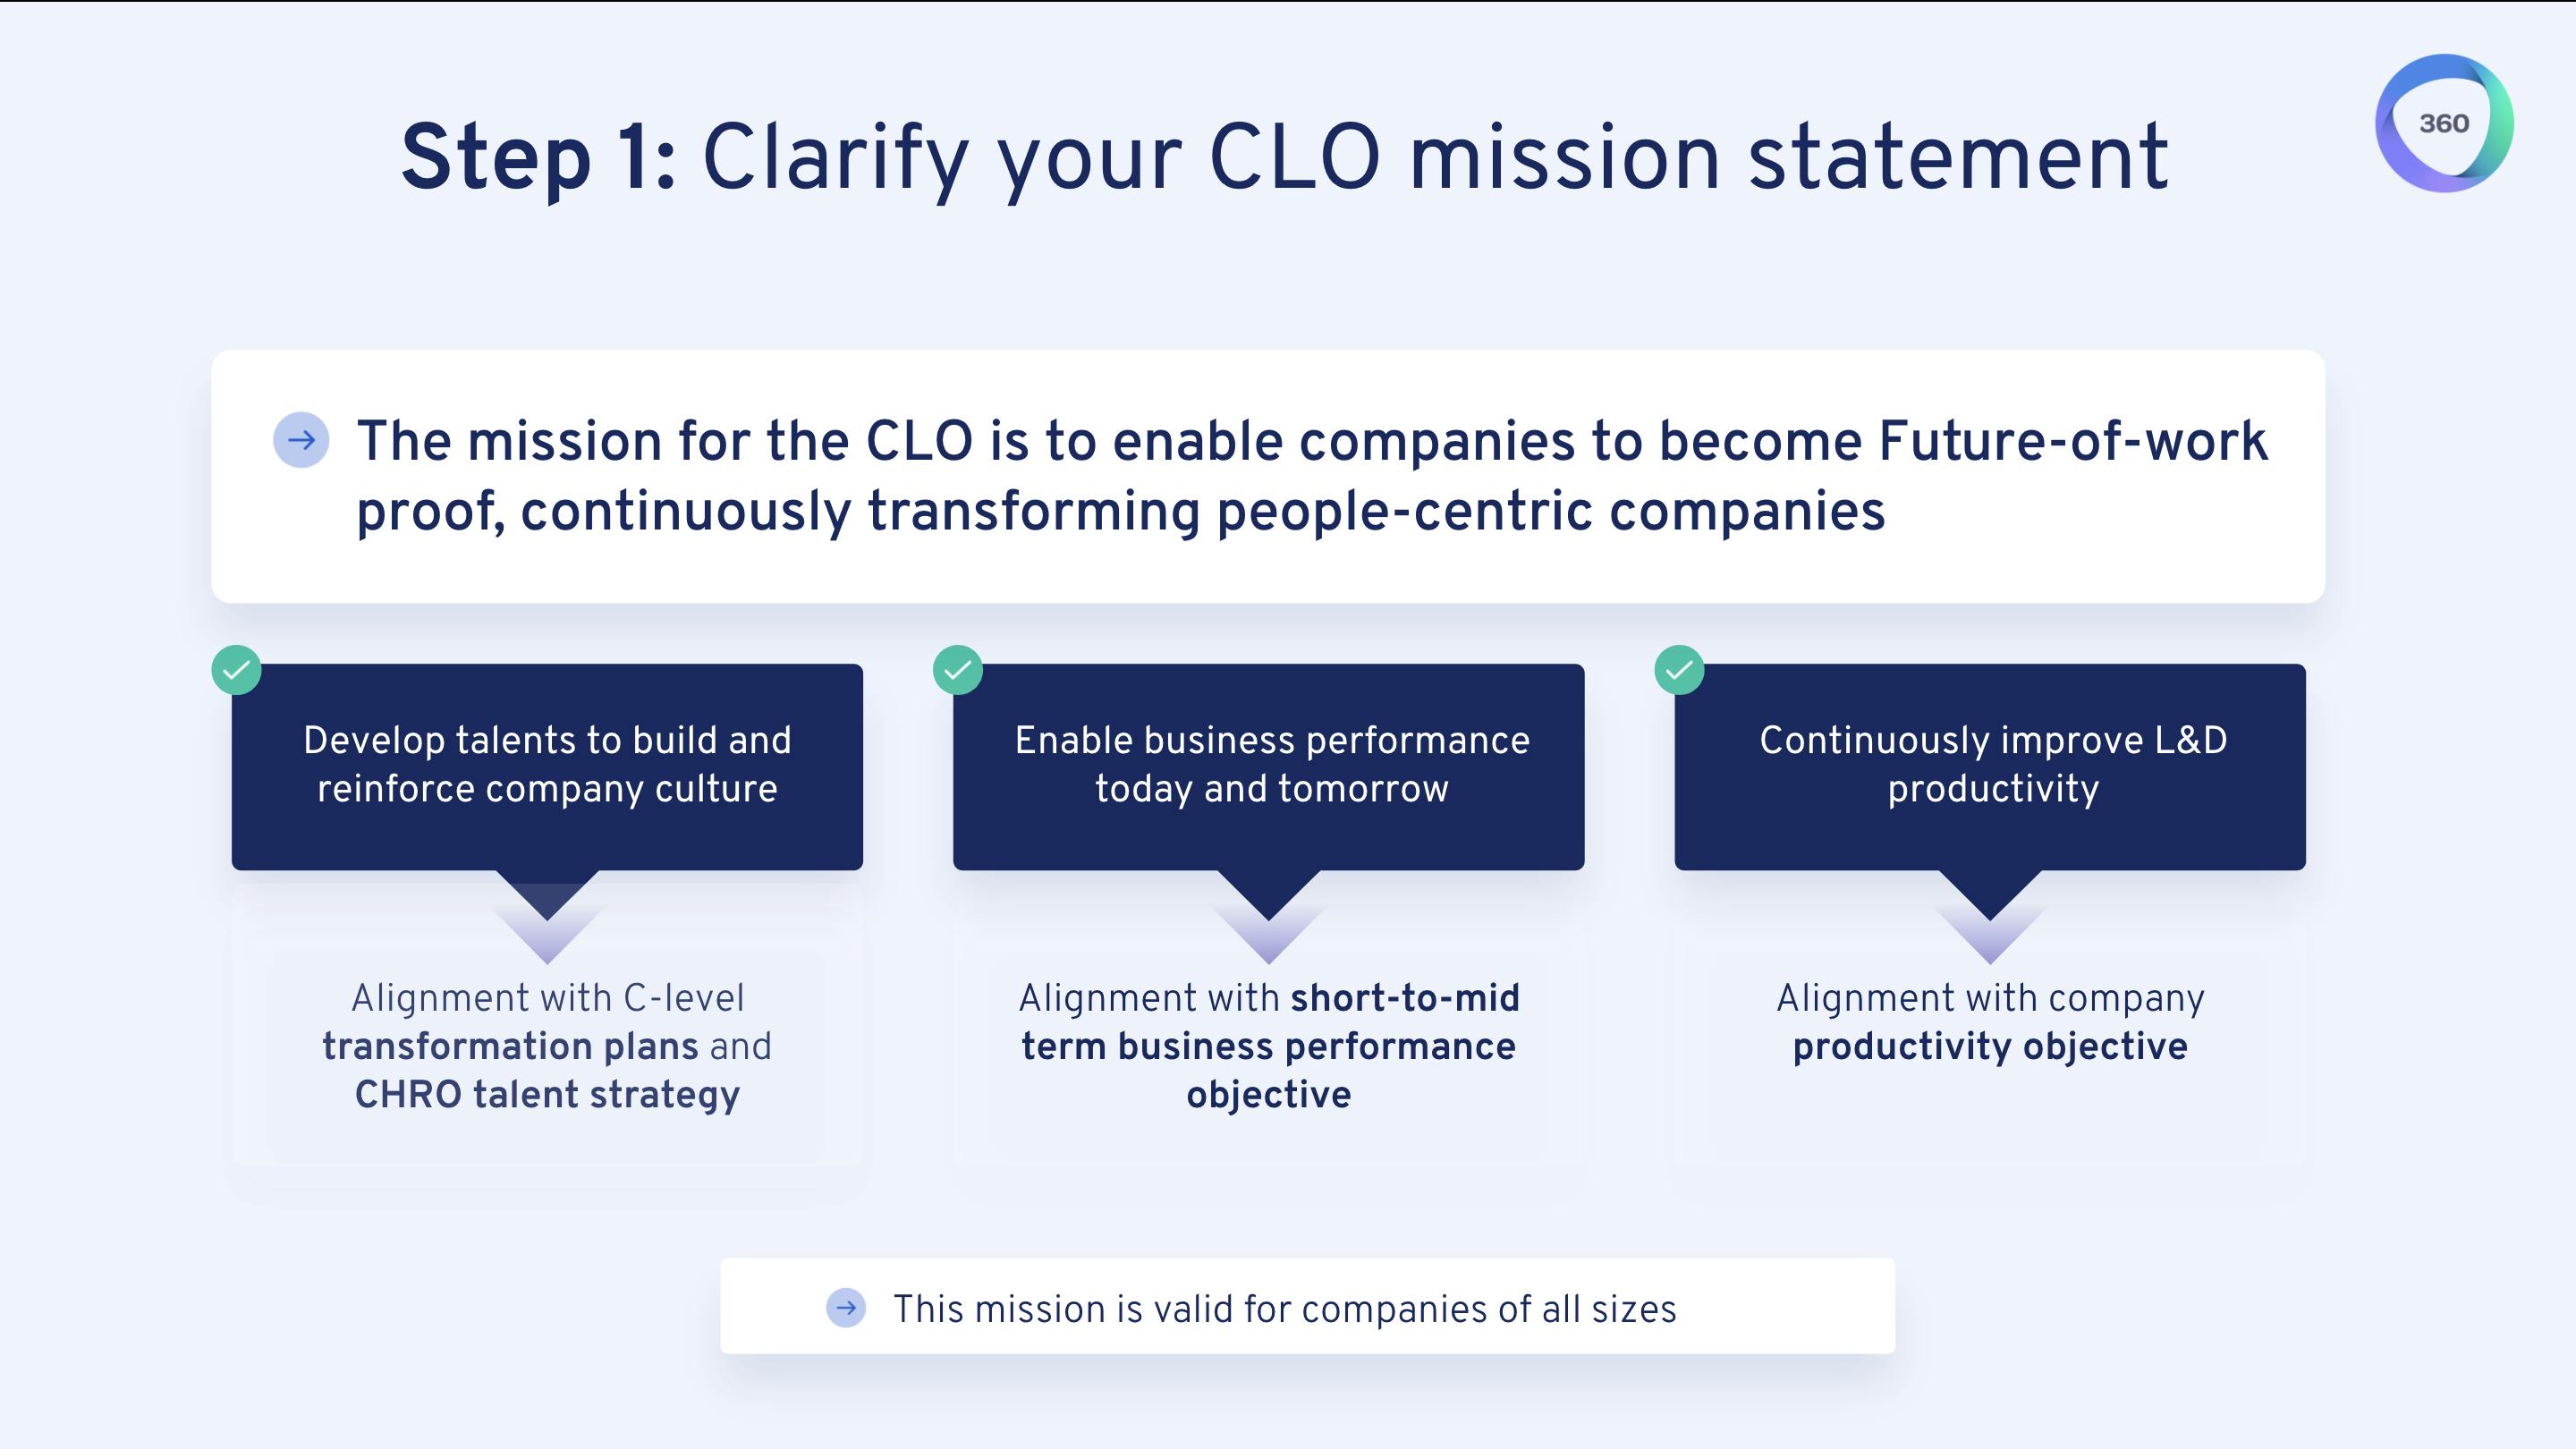 Step 1: Clarify your CLO mission statement